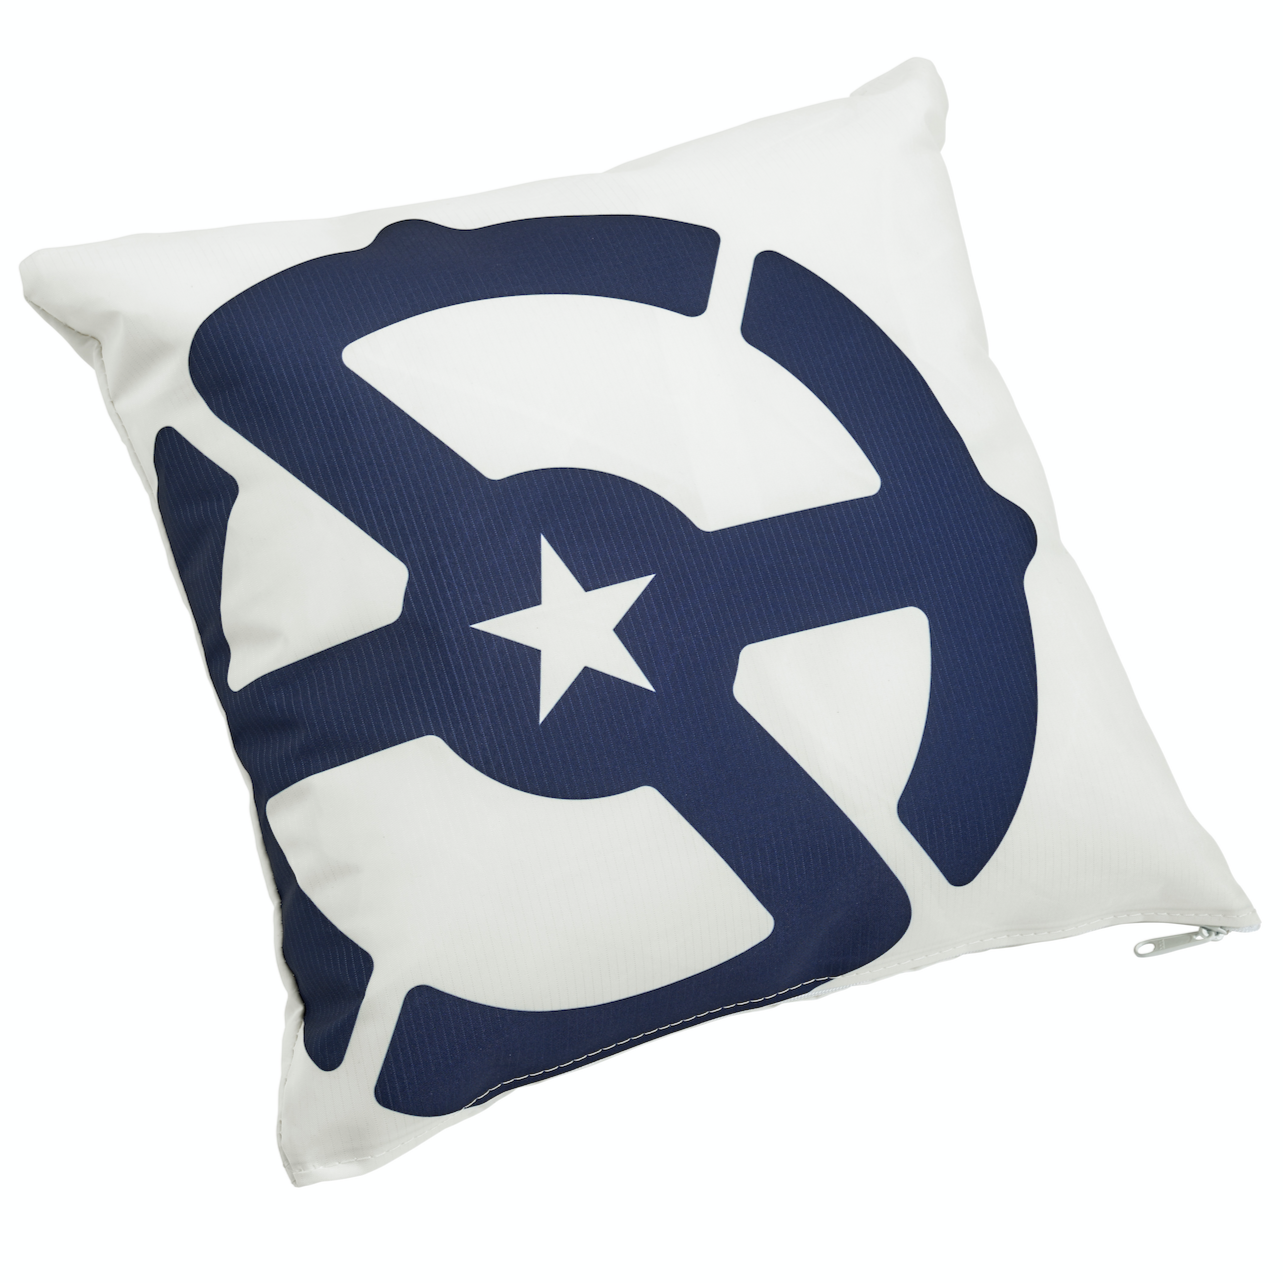 Recycled Sail Pillow by Sea Bags